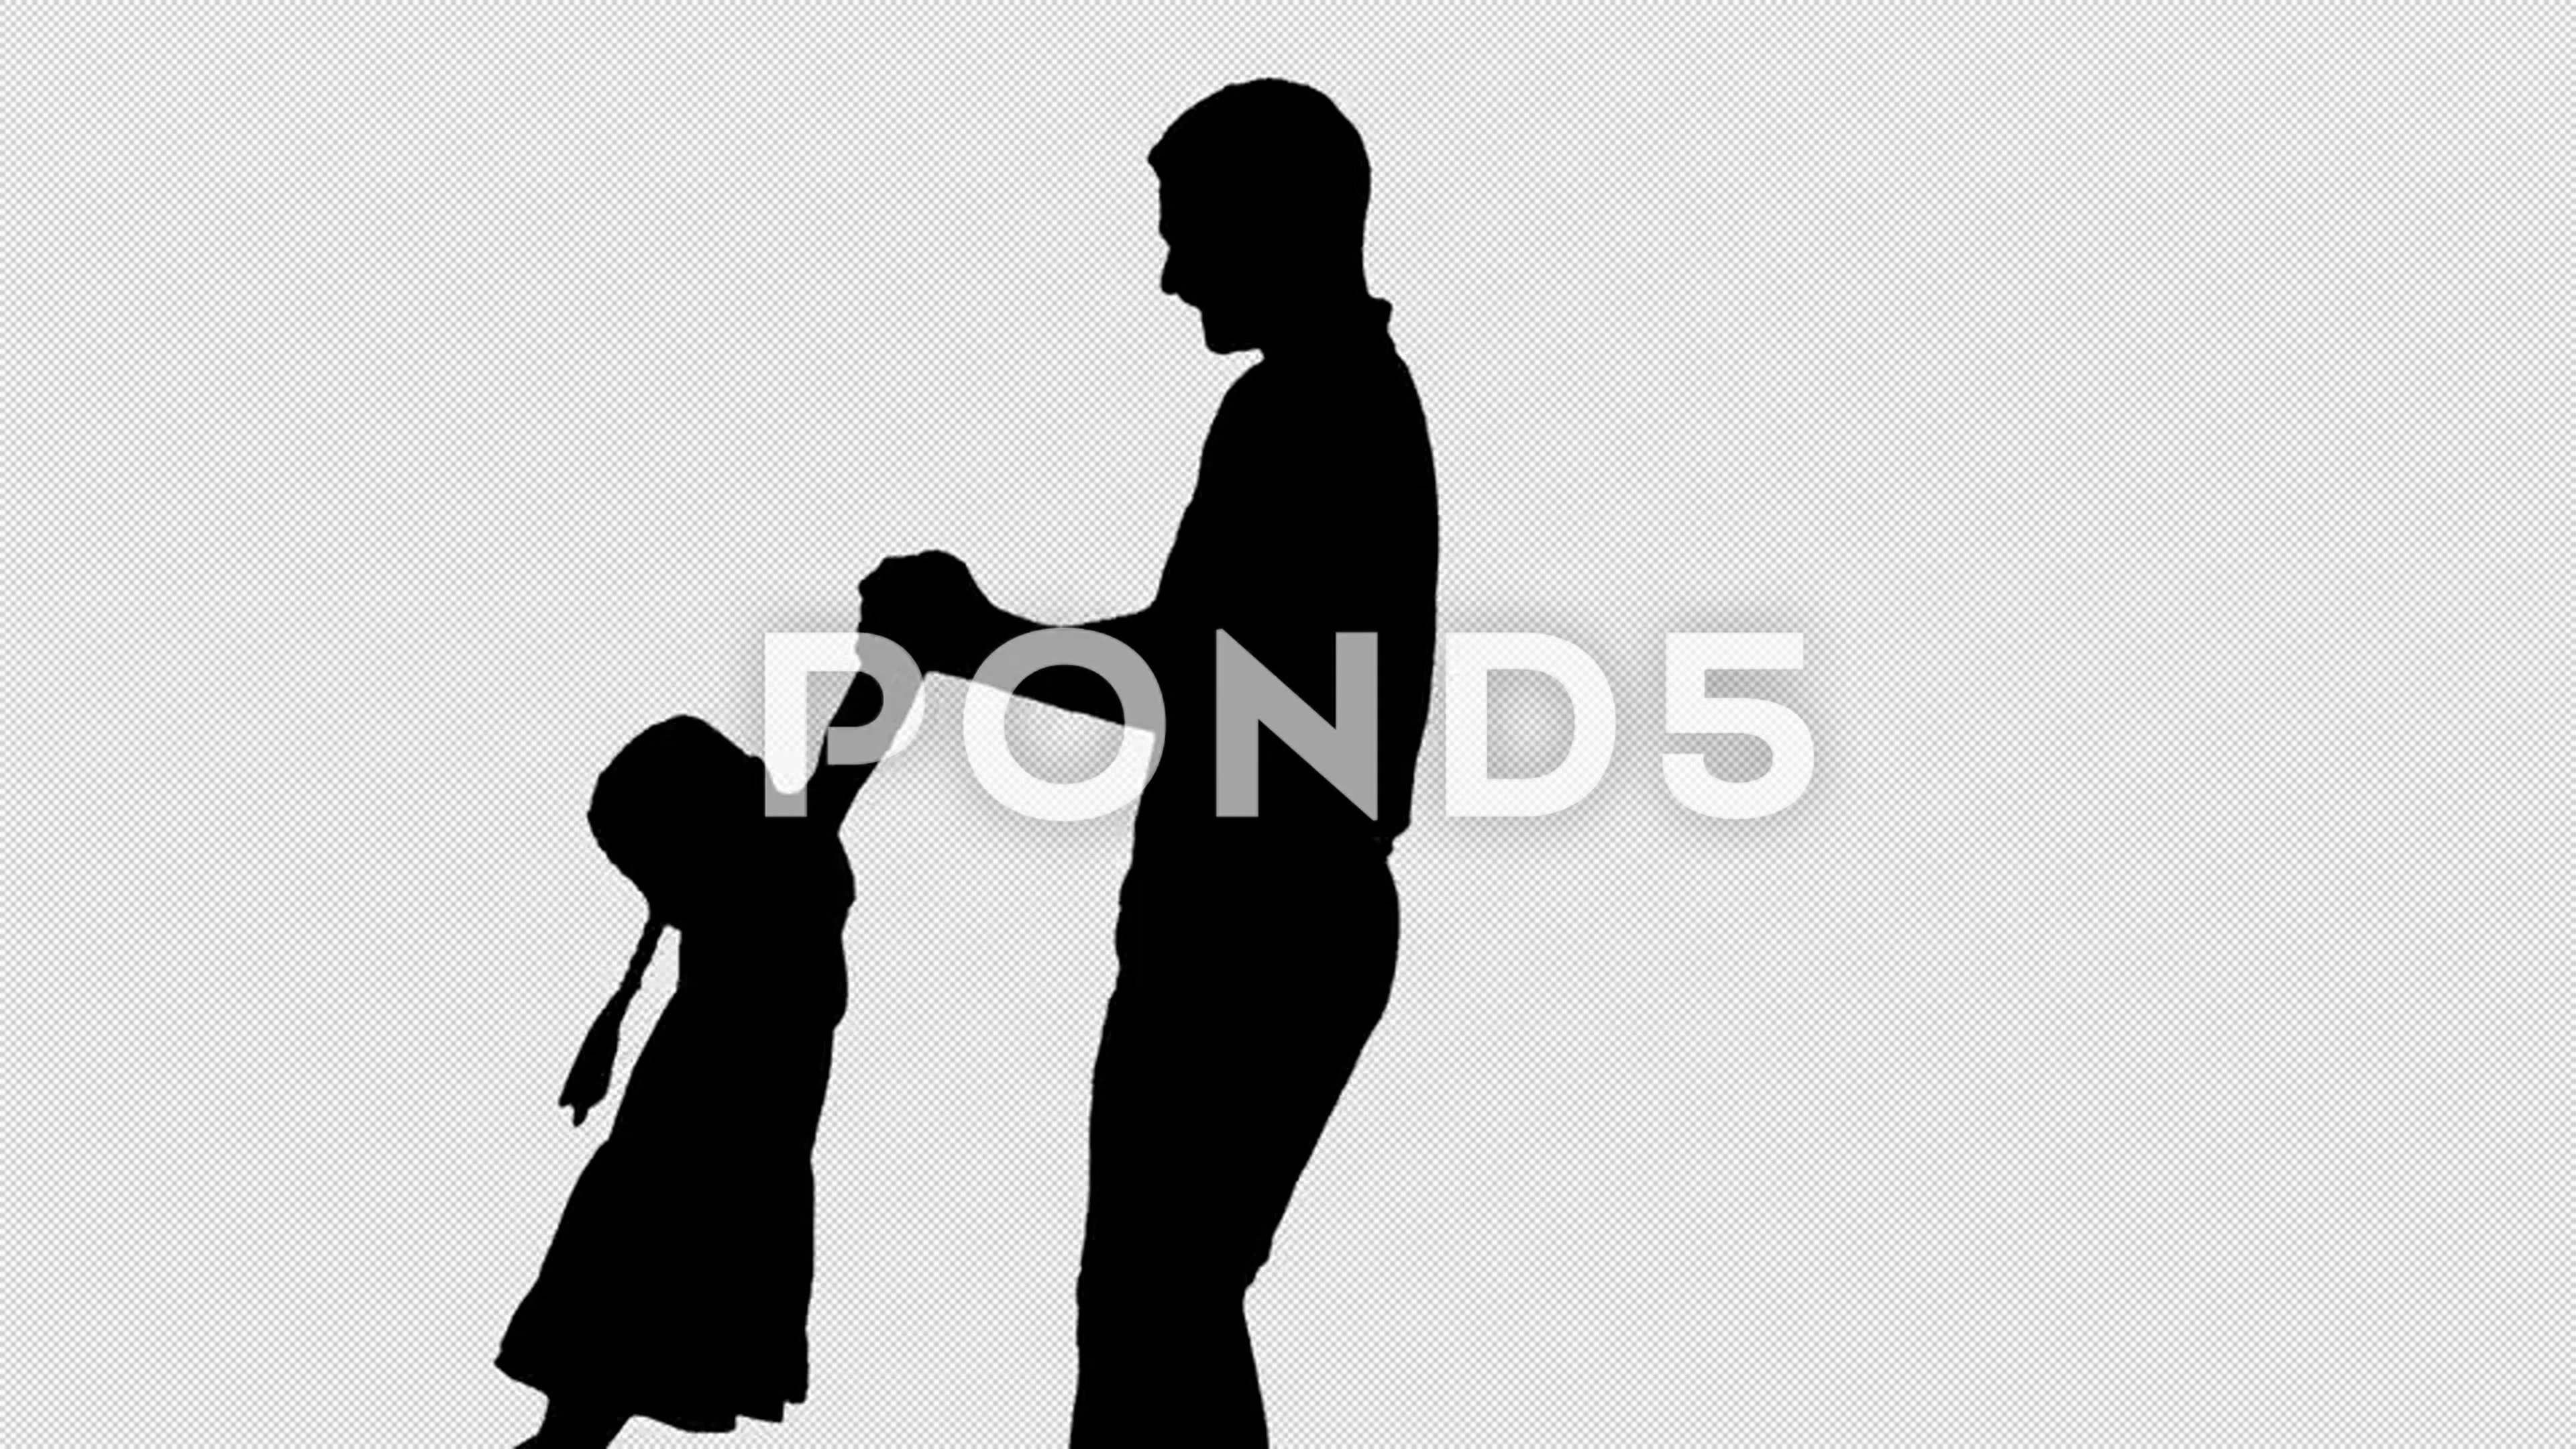 father daughter holding hands silhouette